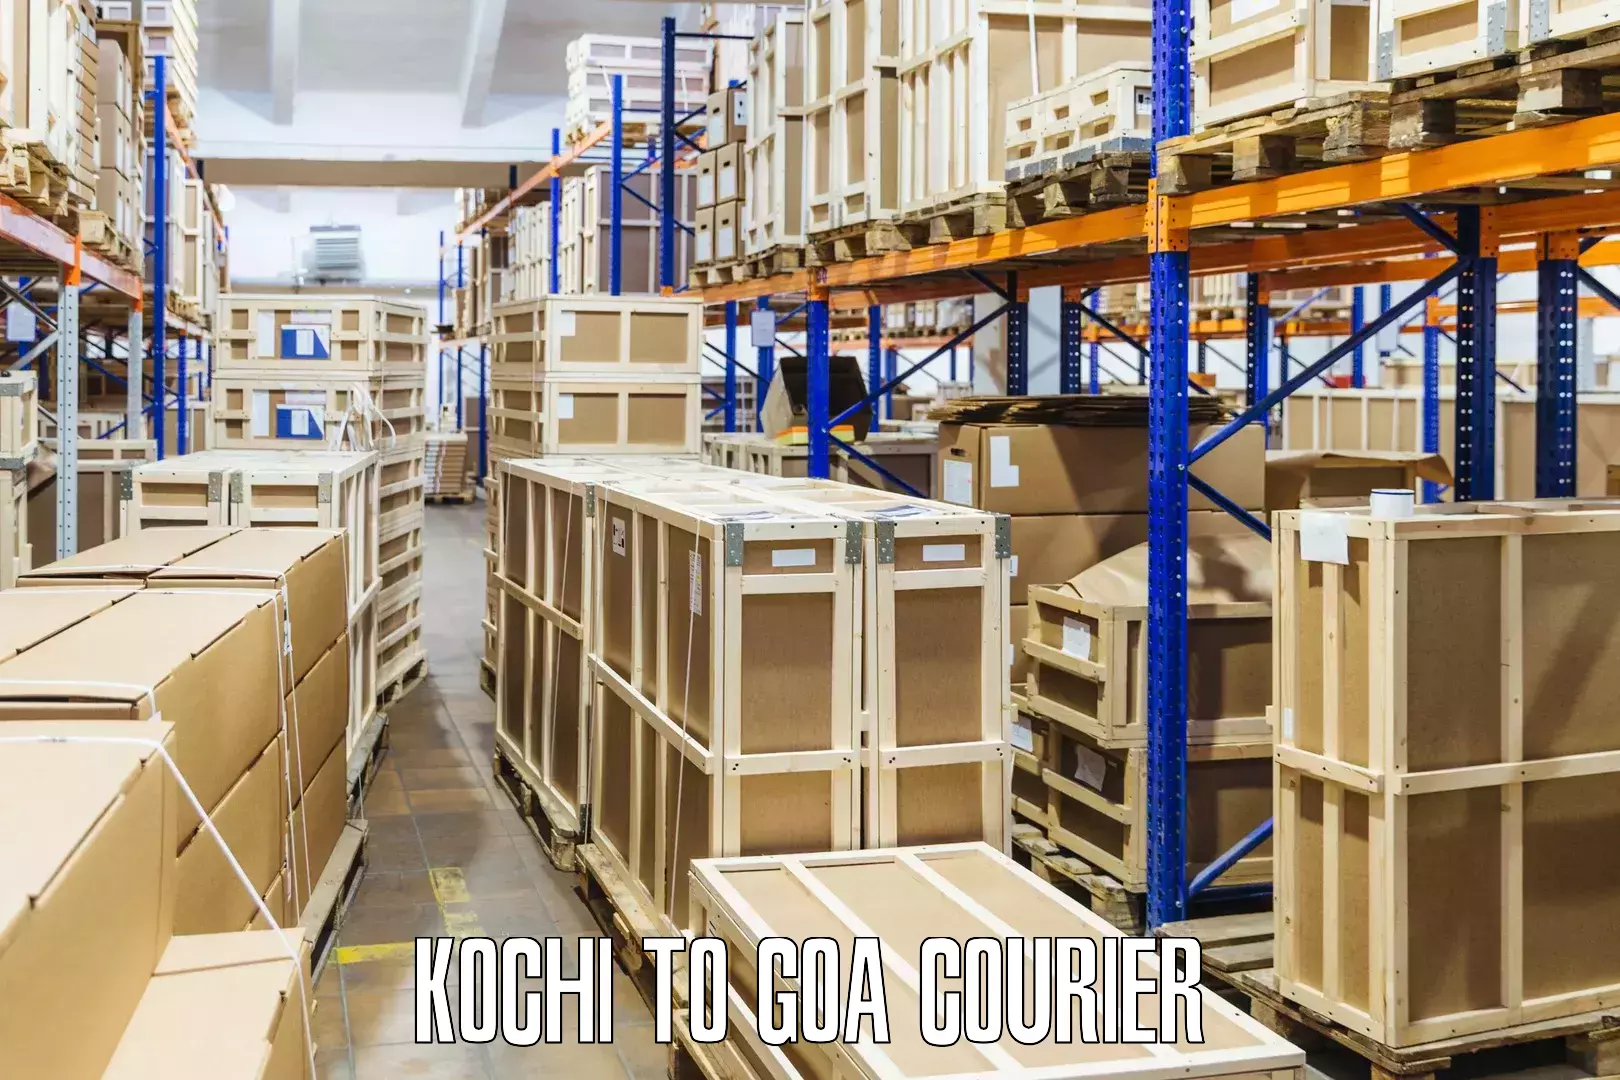 Round-the-clock parcel delivery Kochi to Goa